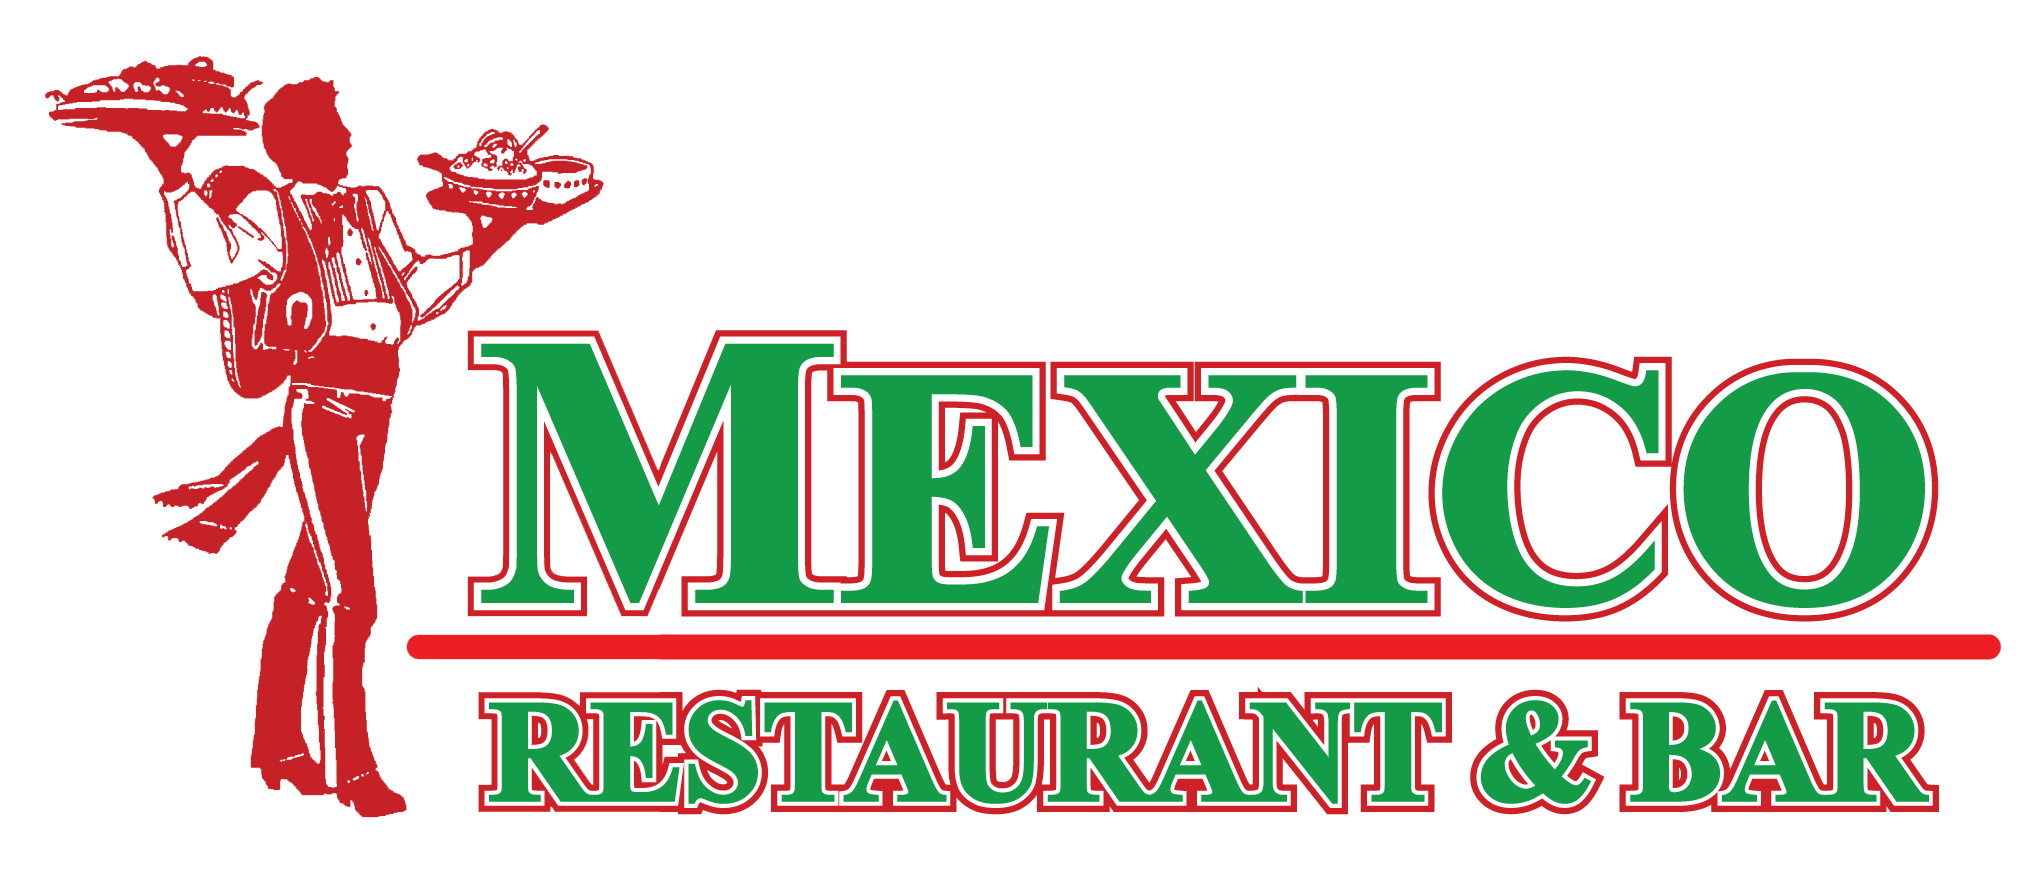 Green and Red Restaurant Logo - Red and green restaurant Logos